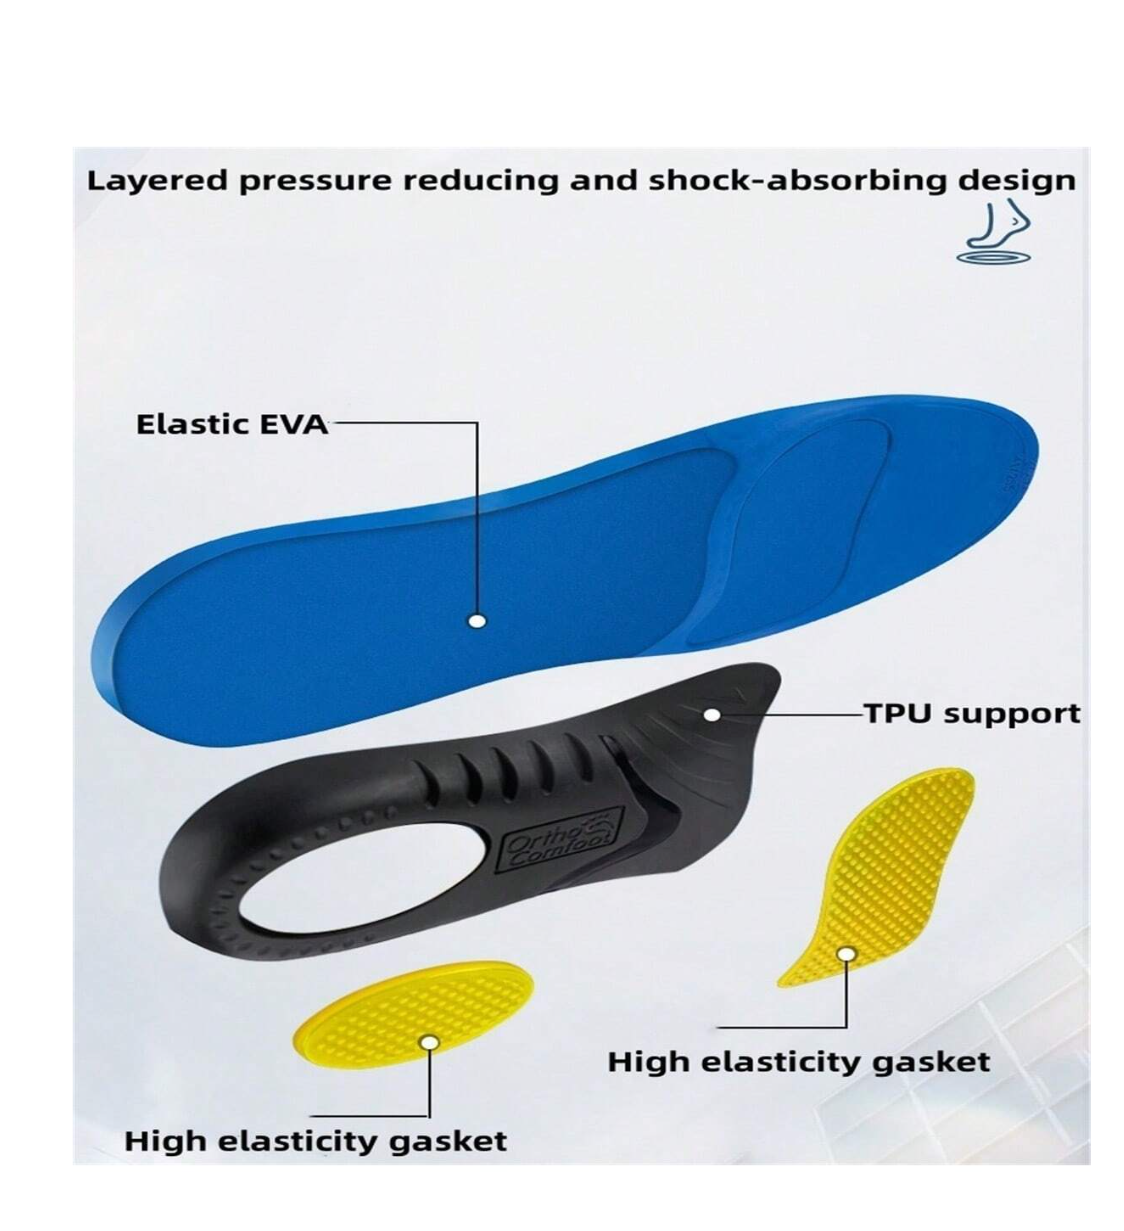 Sculpted Comfort: Orthopedic Insoles for Flat Feet and Low Arch Support - Elevate Your Every Step!